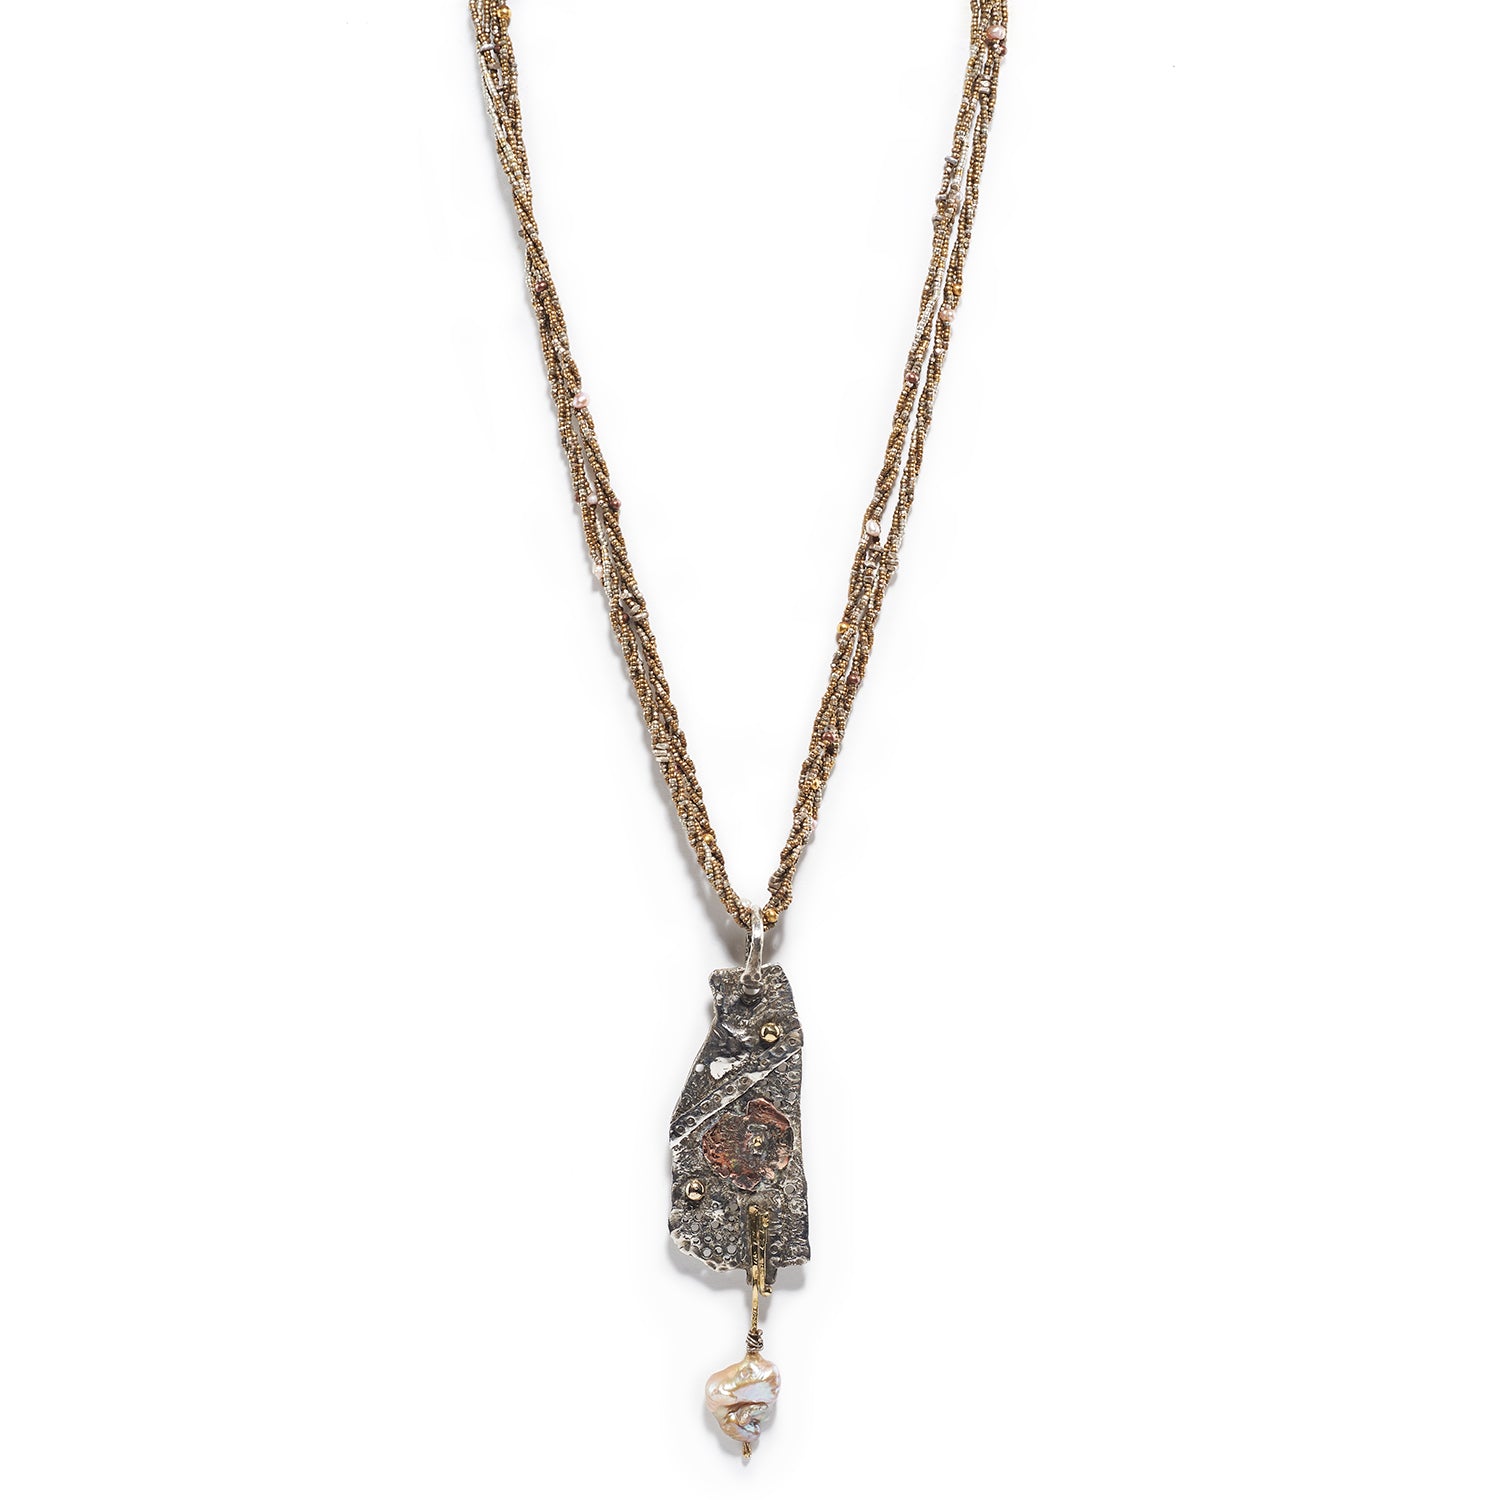 Reticulated Pendant Necklace